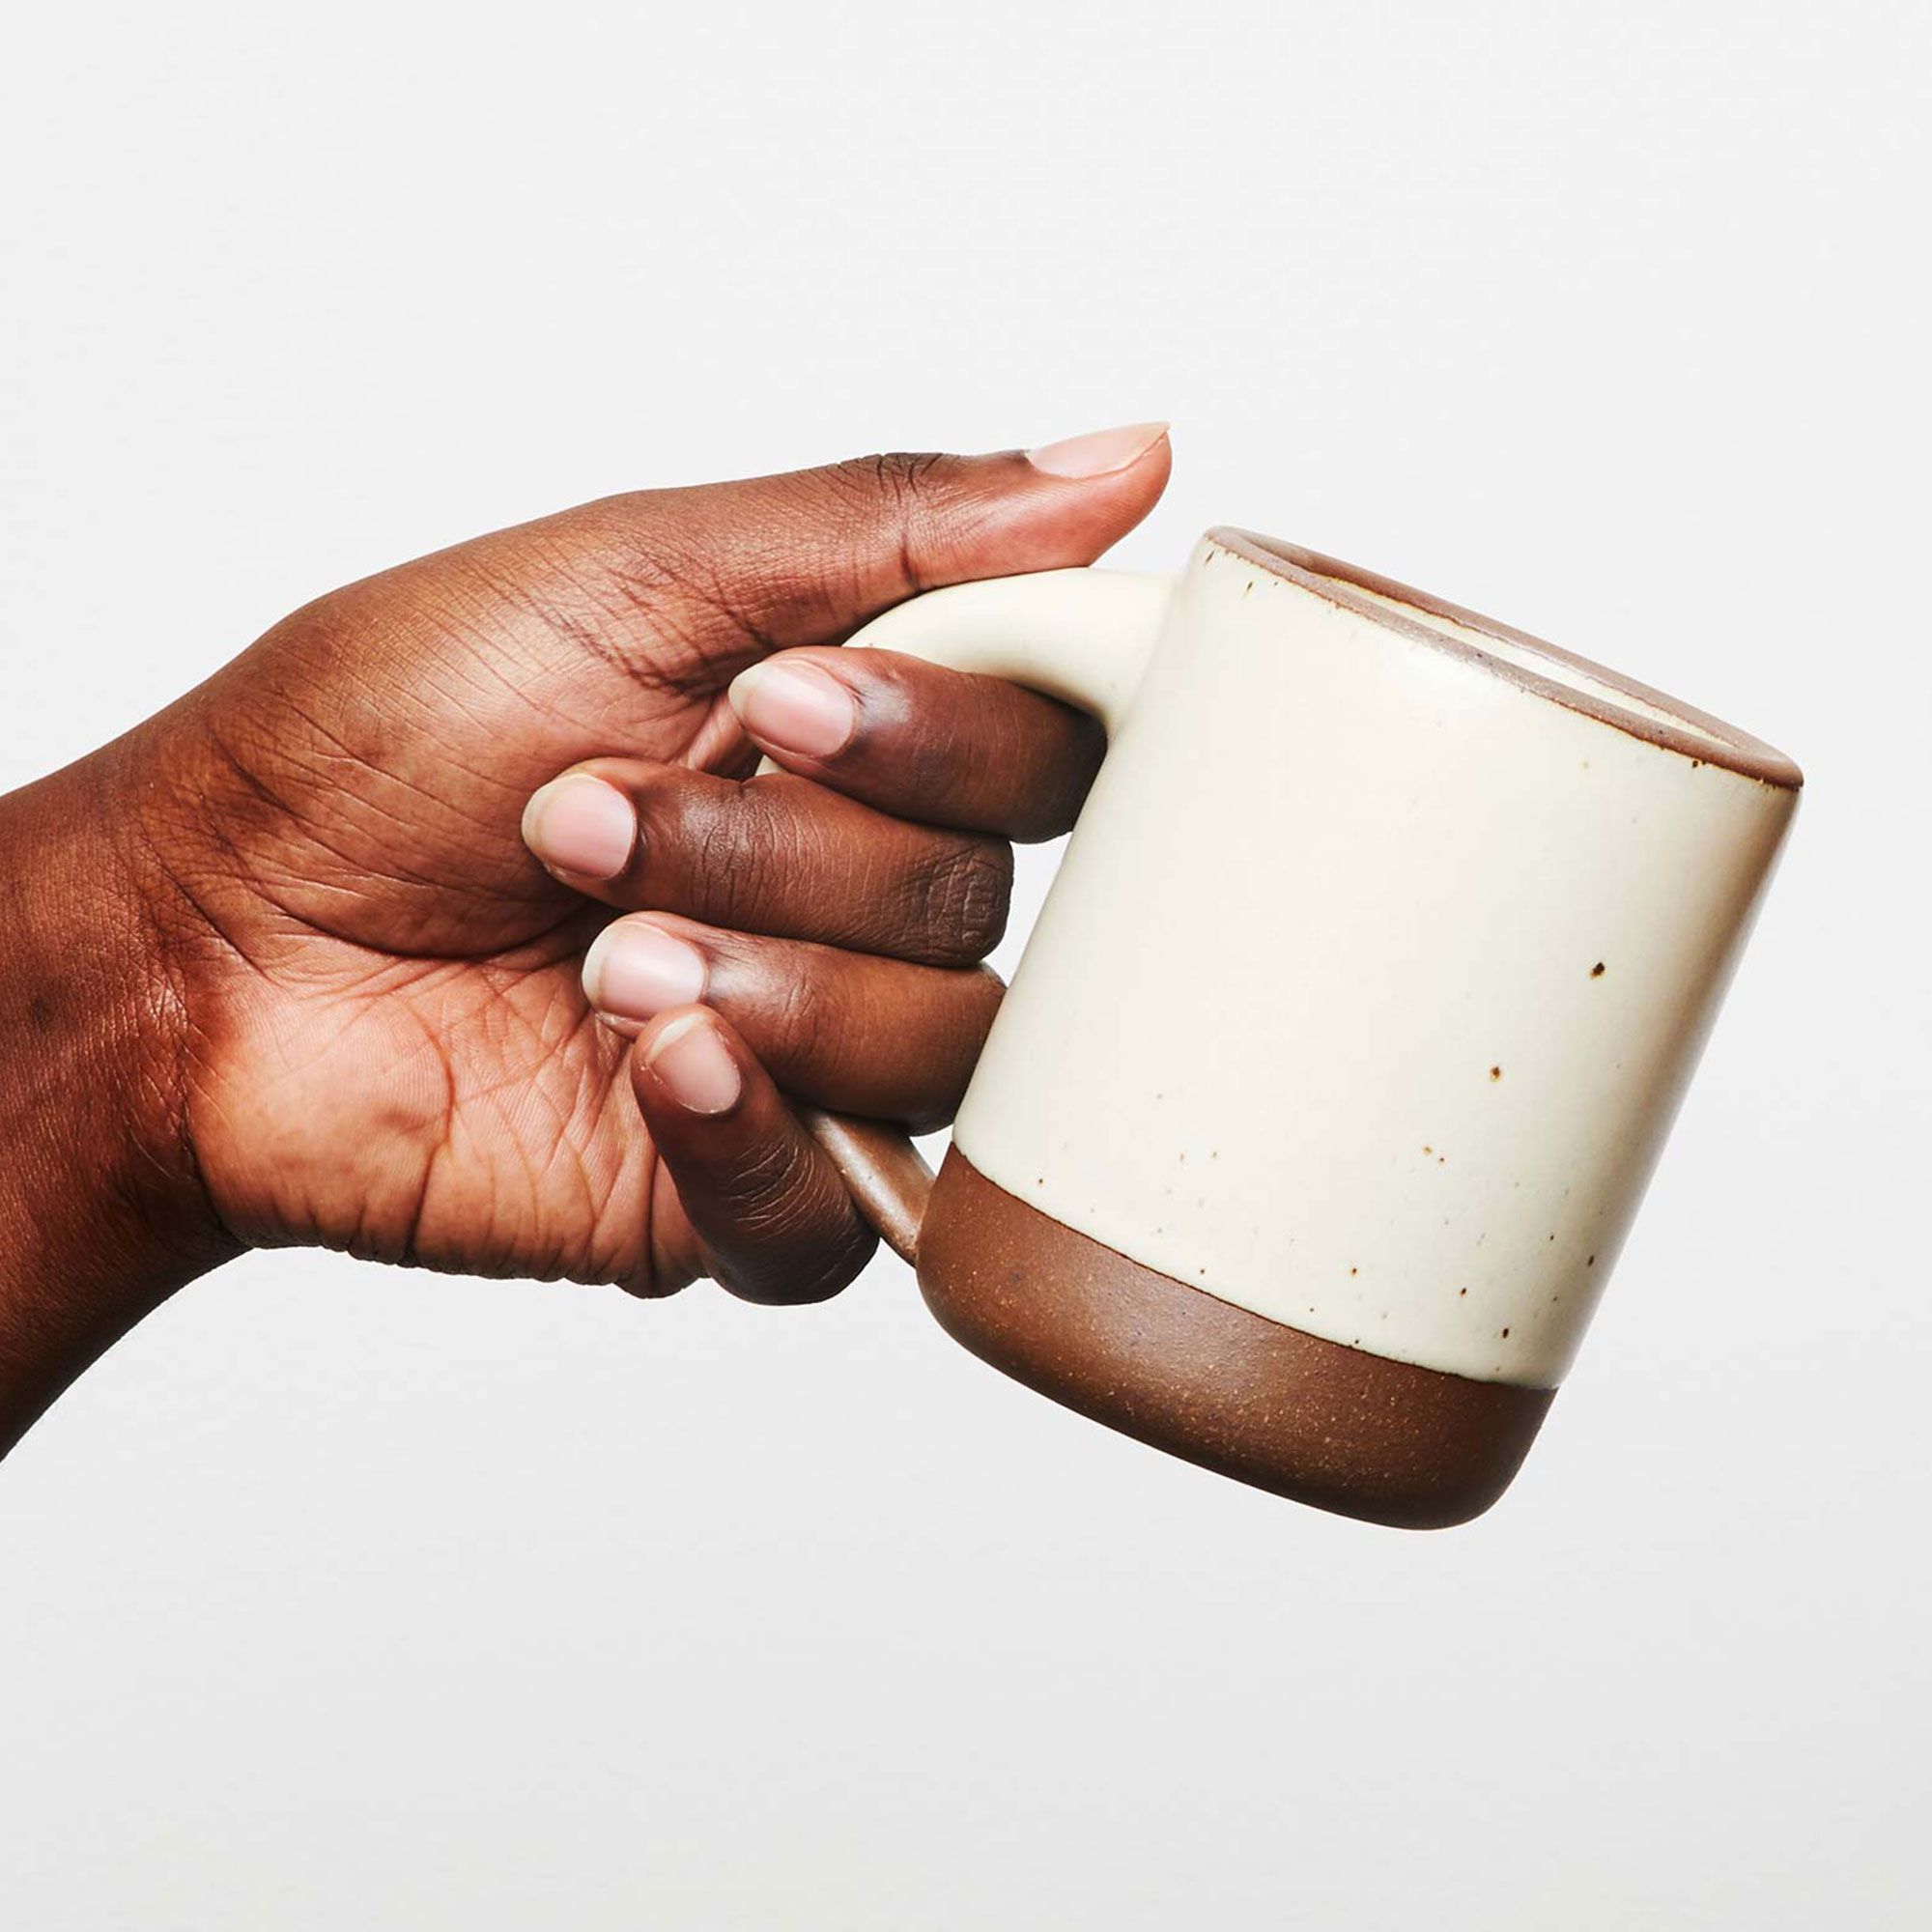 A hand holding a medium sized ceramic mug with handle in a warm, tan-toned, off-white color featuring iron speckles and unglazed rim and bottom base.